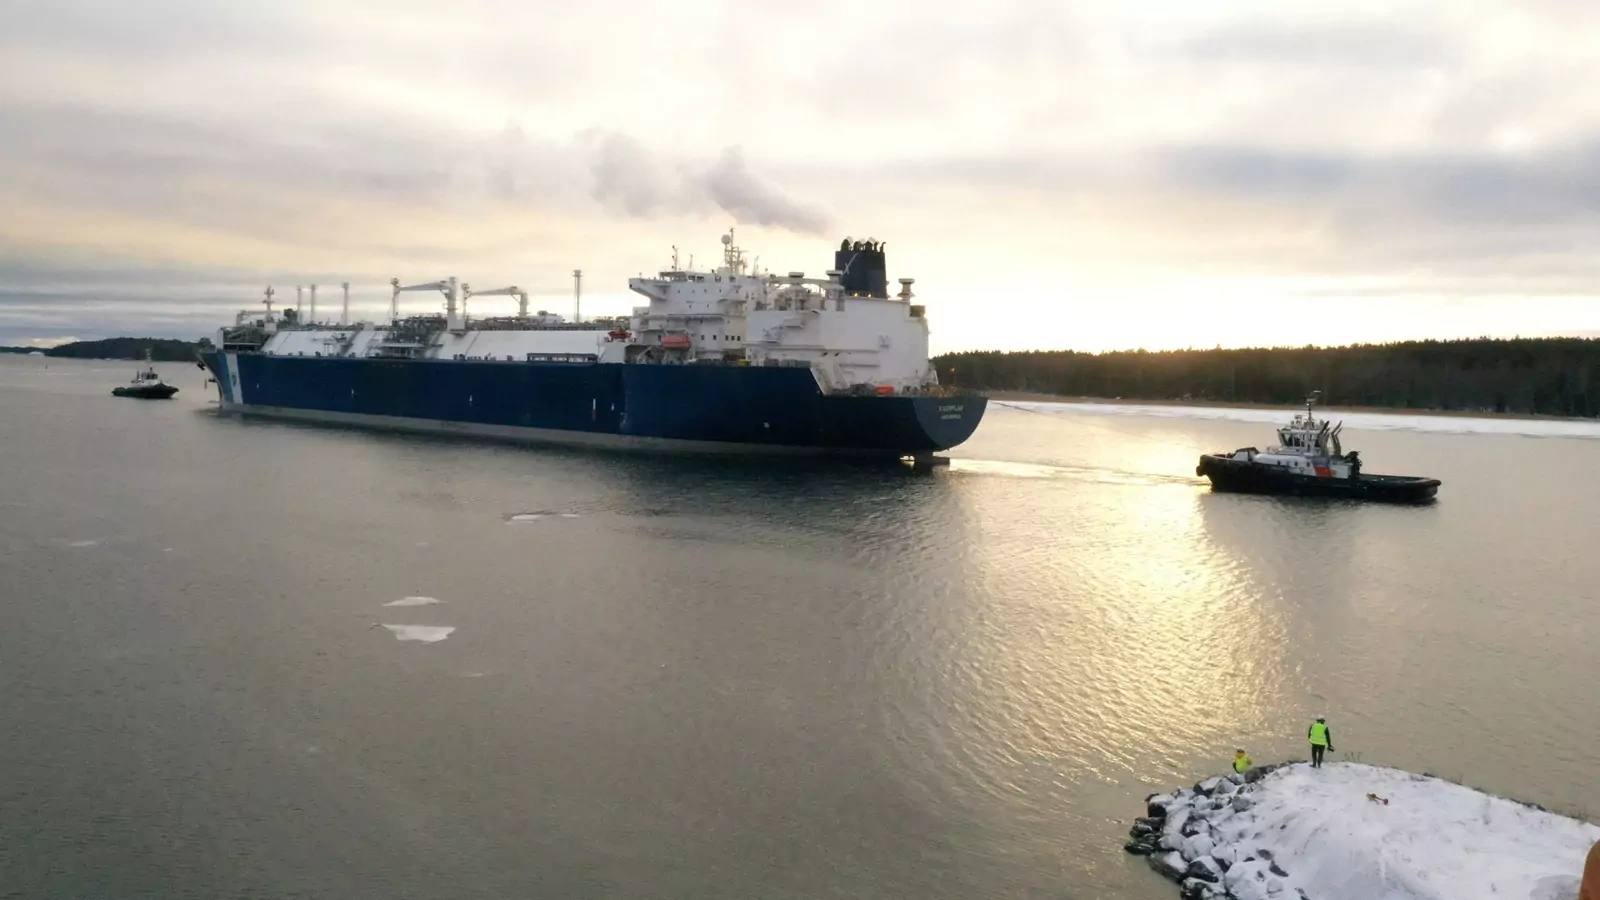 FSRU Exemplar, the floating liquefied natural gas (LNG) terminal, chartered by Finland to replace Russian gas, arrives to the Inkoo port.